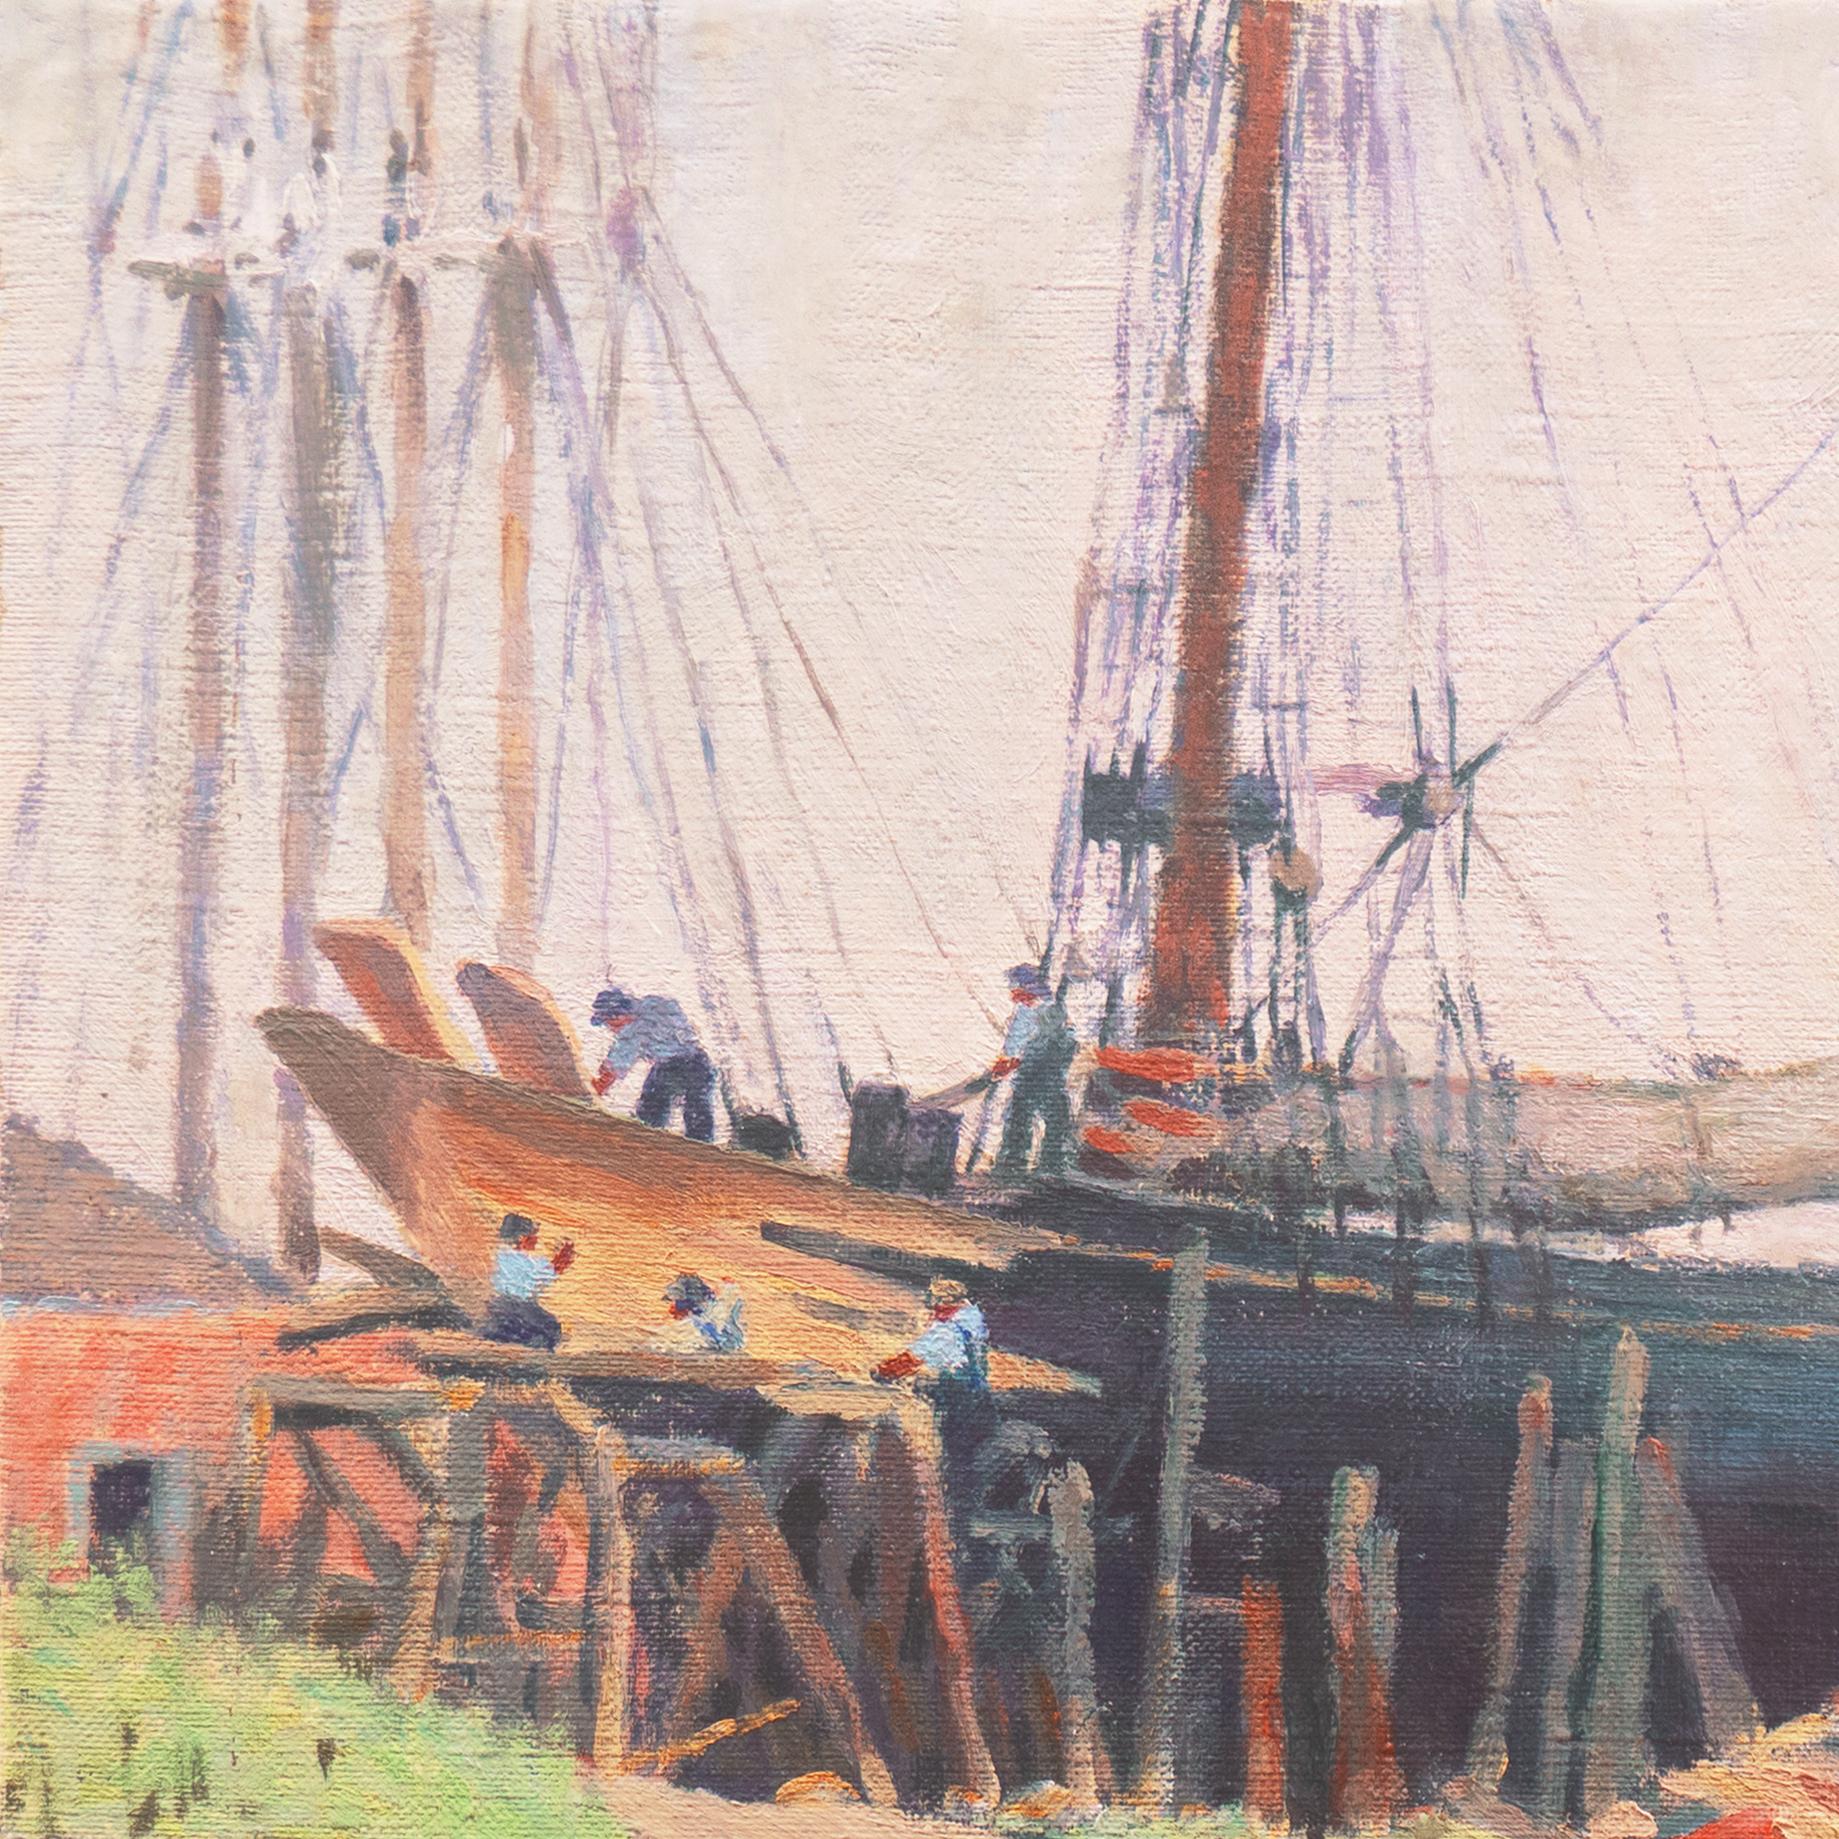 'When the Boats Were Made of Wood and the Men Were Made of Steel', Impressionist - Post-Impressionist Painting by American School (20th century)